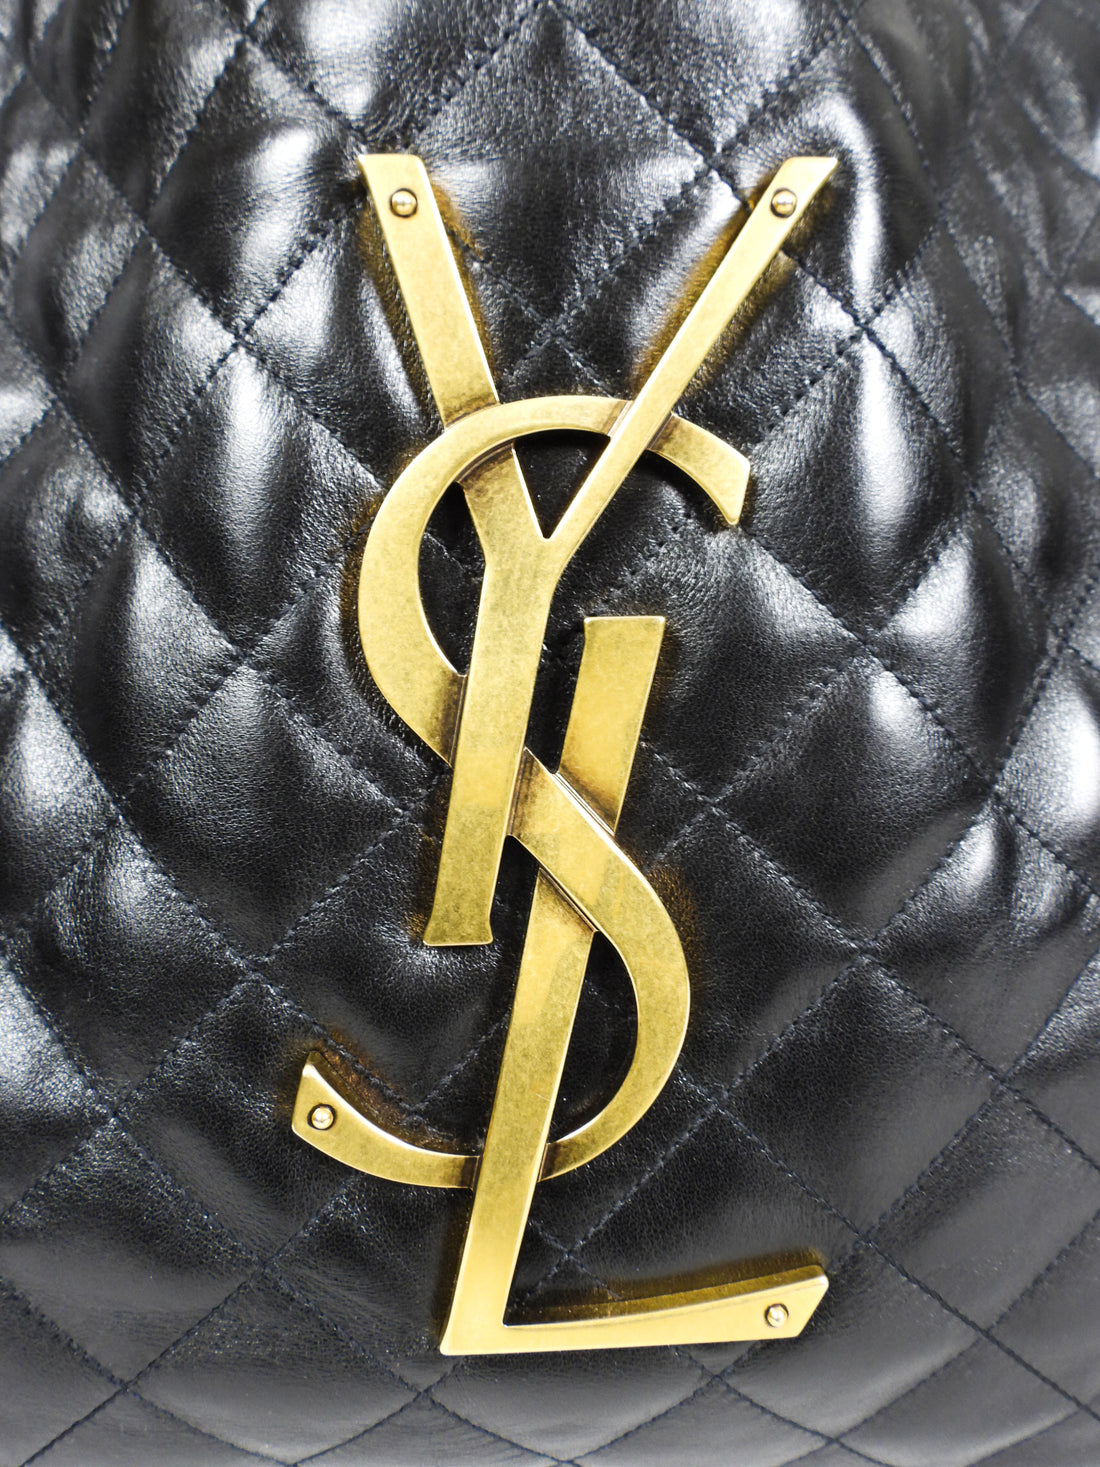 Saint Laurent Black Quilted Lambskin Maxi Shopping Icare Tote Bag